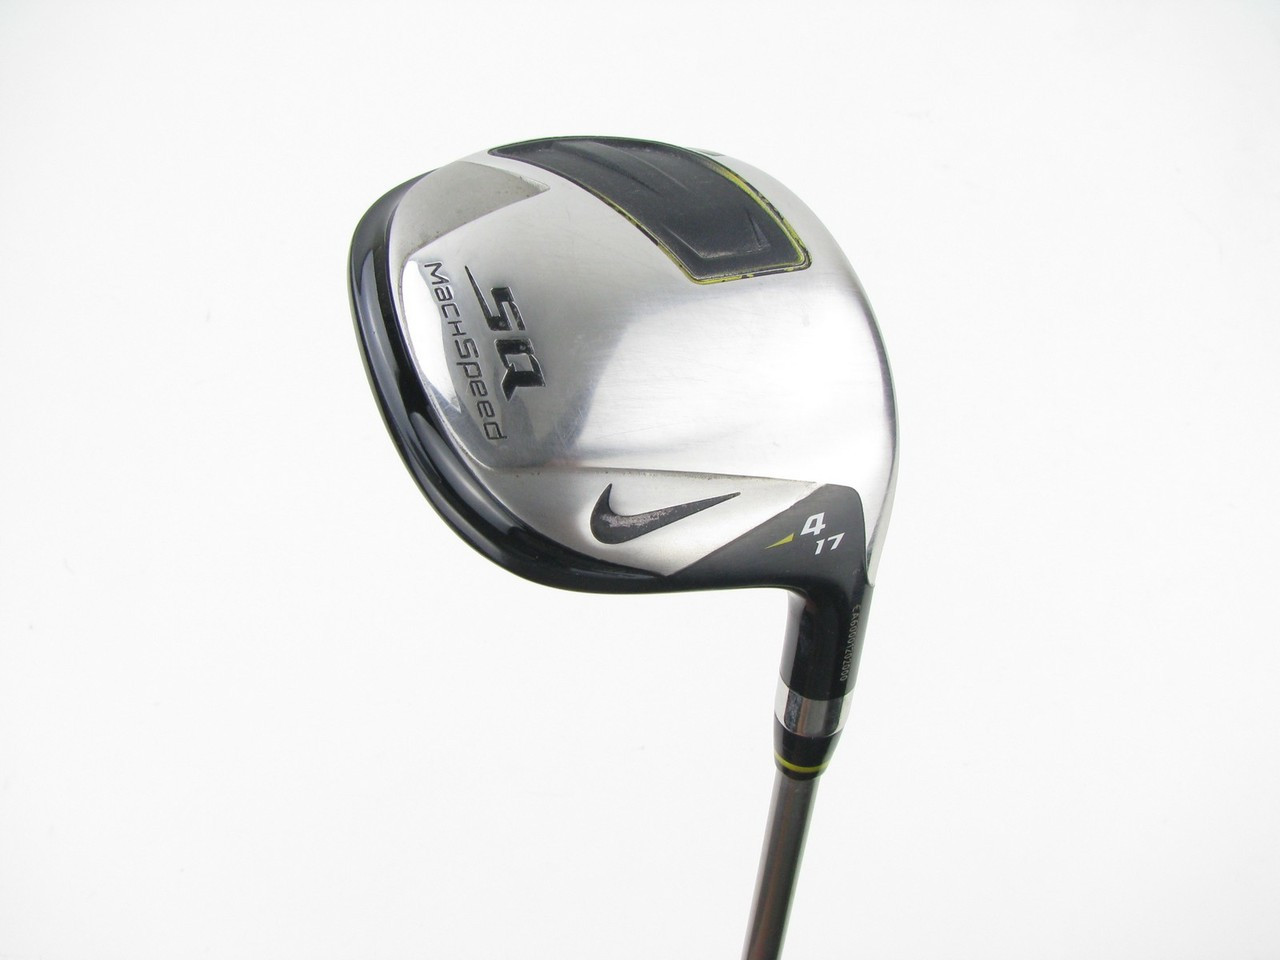 Nike SQ Machspeed 4 wood 17 degree w/ Axivcore 70g Stiff (Out of Stock) -  Clubs n Covers Golf